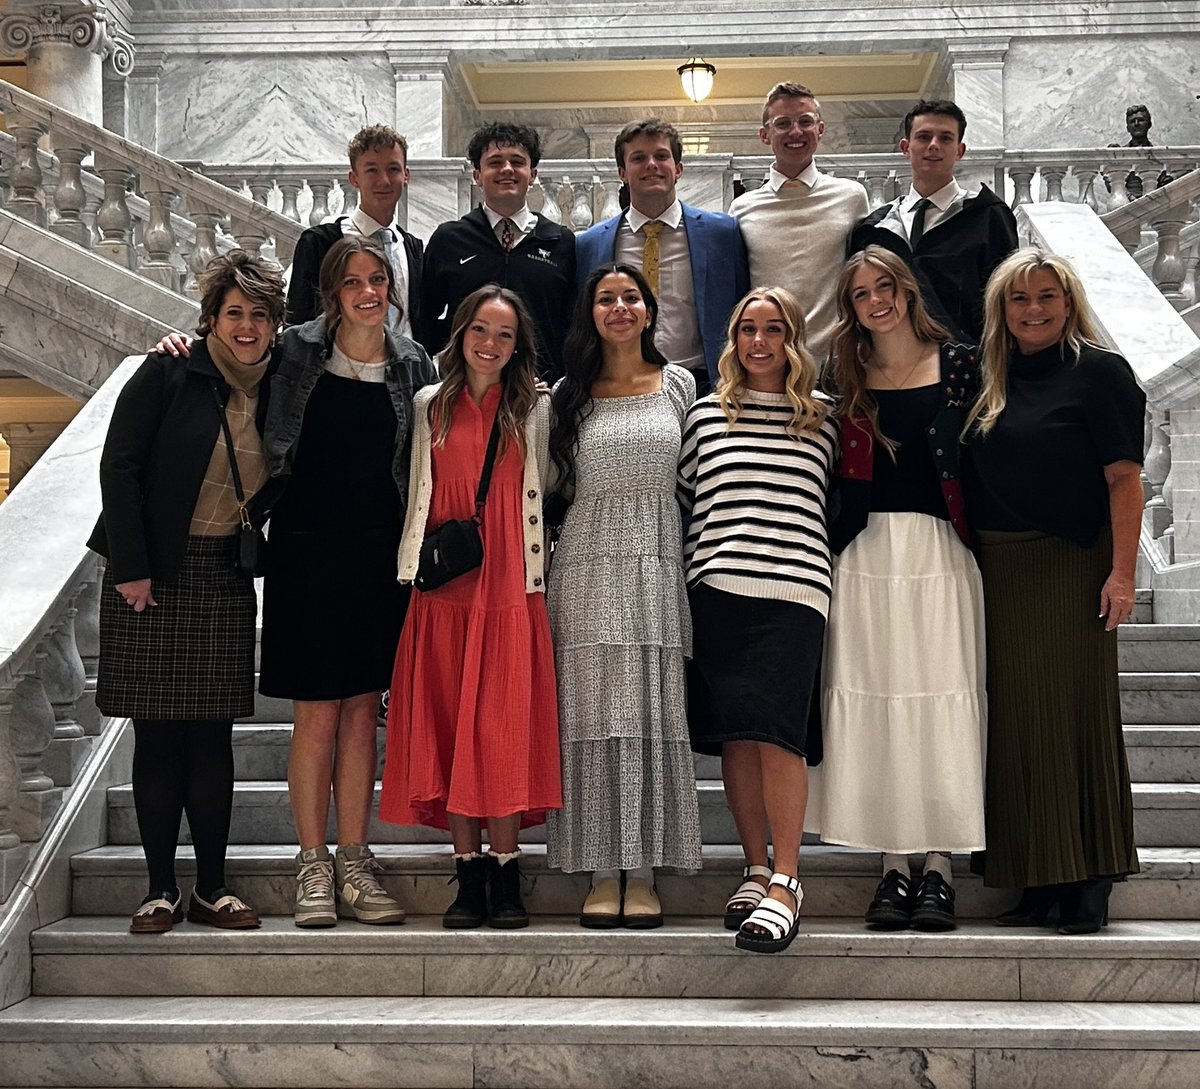 Our student leaders in the UASC have done a great job representing secondary schools this year. They recently spent time at the Capital talking with reps from the Governors office as well as Legislators about issues students are facing today. Applications due 3/31 for 2024 UASC.